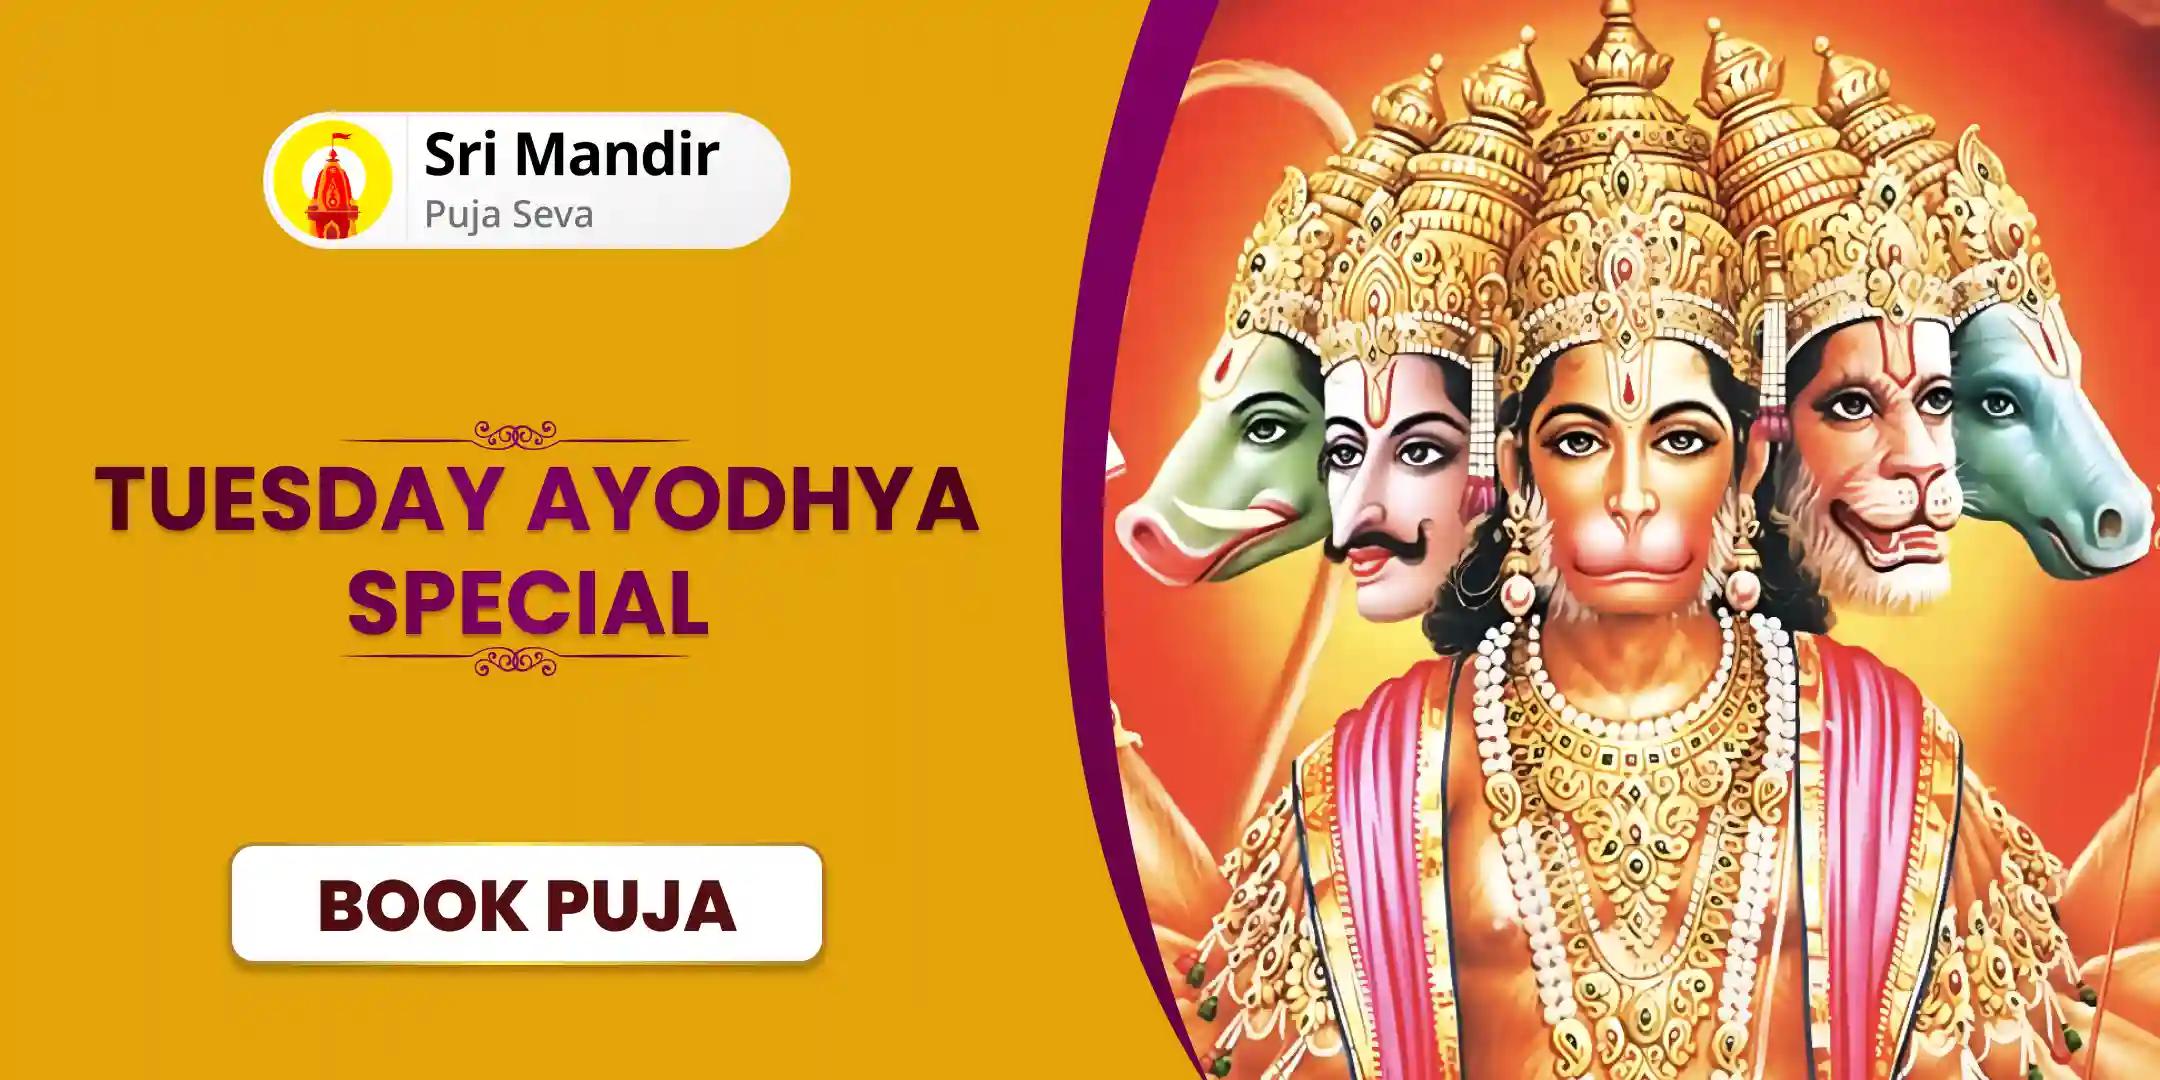 Tuesday Ayodhya Special 11,000 Hanuman Mool Mantra Jaap and Hanuman Chalisa Path For Mental and Physical Strength to Destroy Negativity in Life